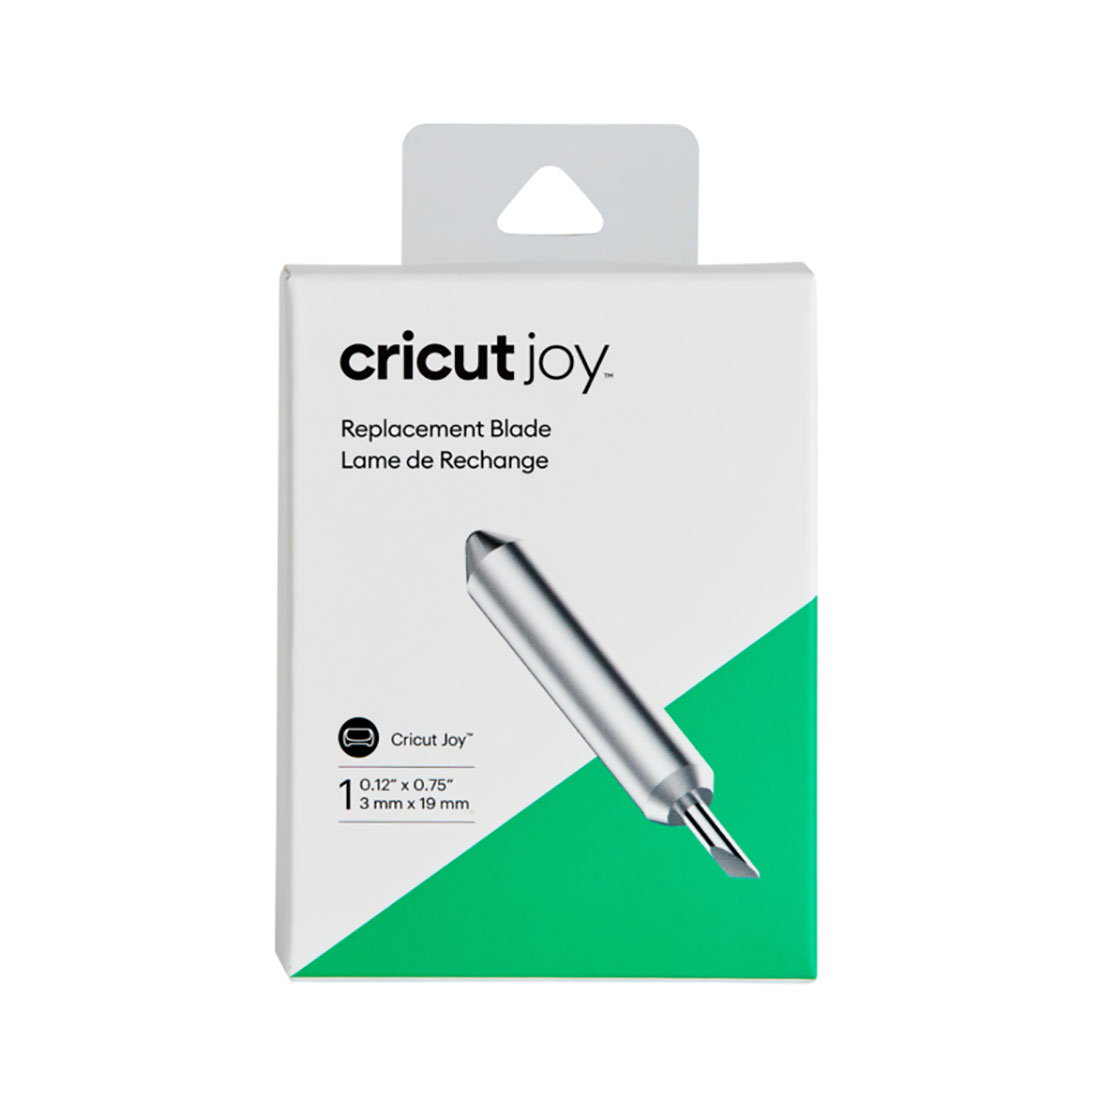 TWO Cricut Joy Replacement Blades All-Purpose Blade For Cricut Joy ONLY